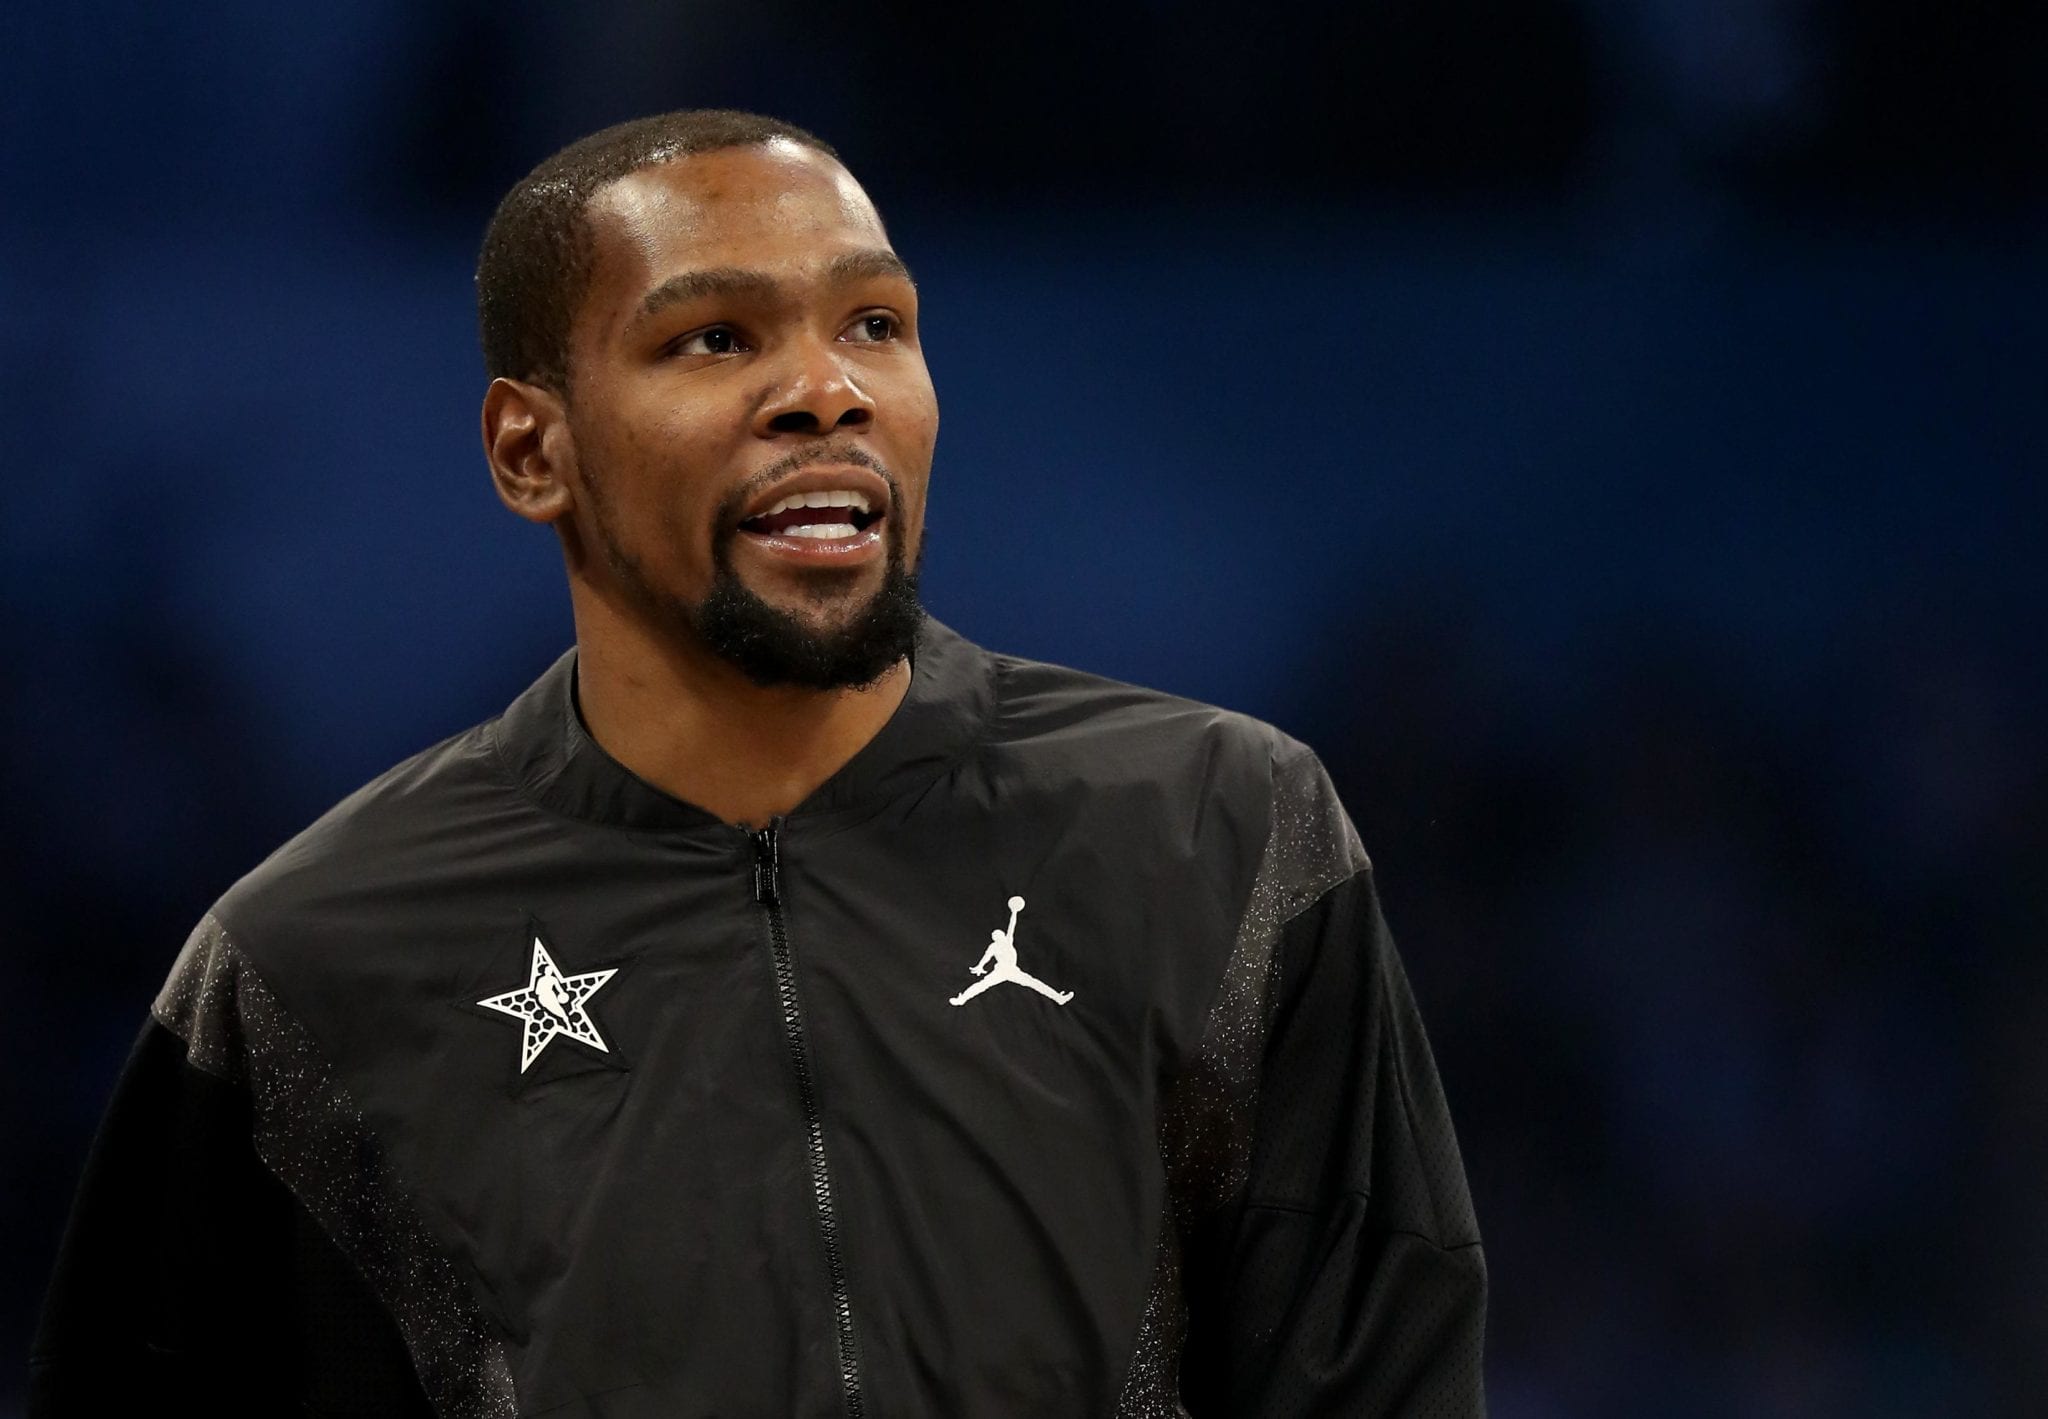 Kevin Durant Listed His Top 5 Teammates and He Almost Forgot Russell Westbrook